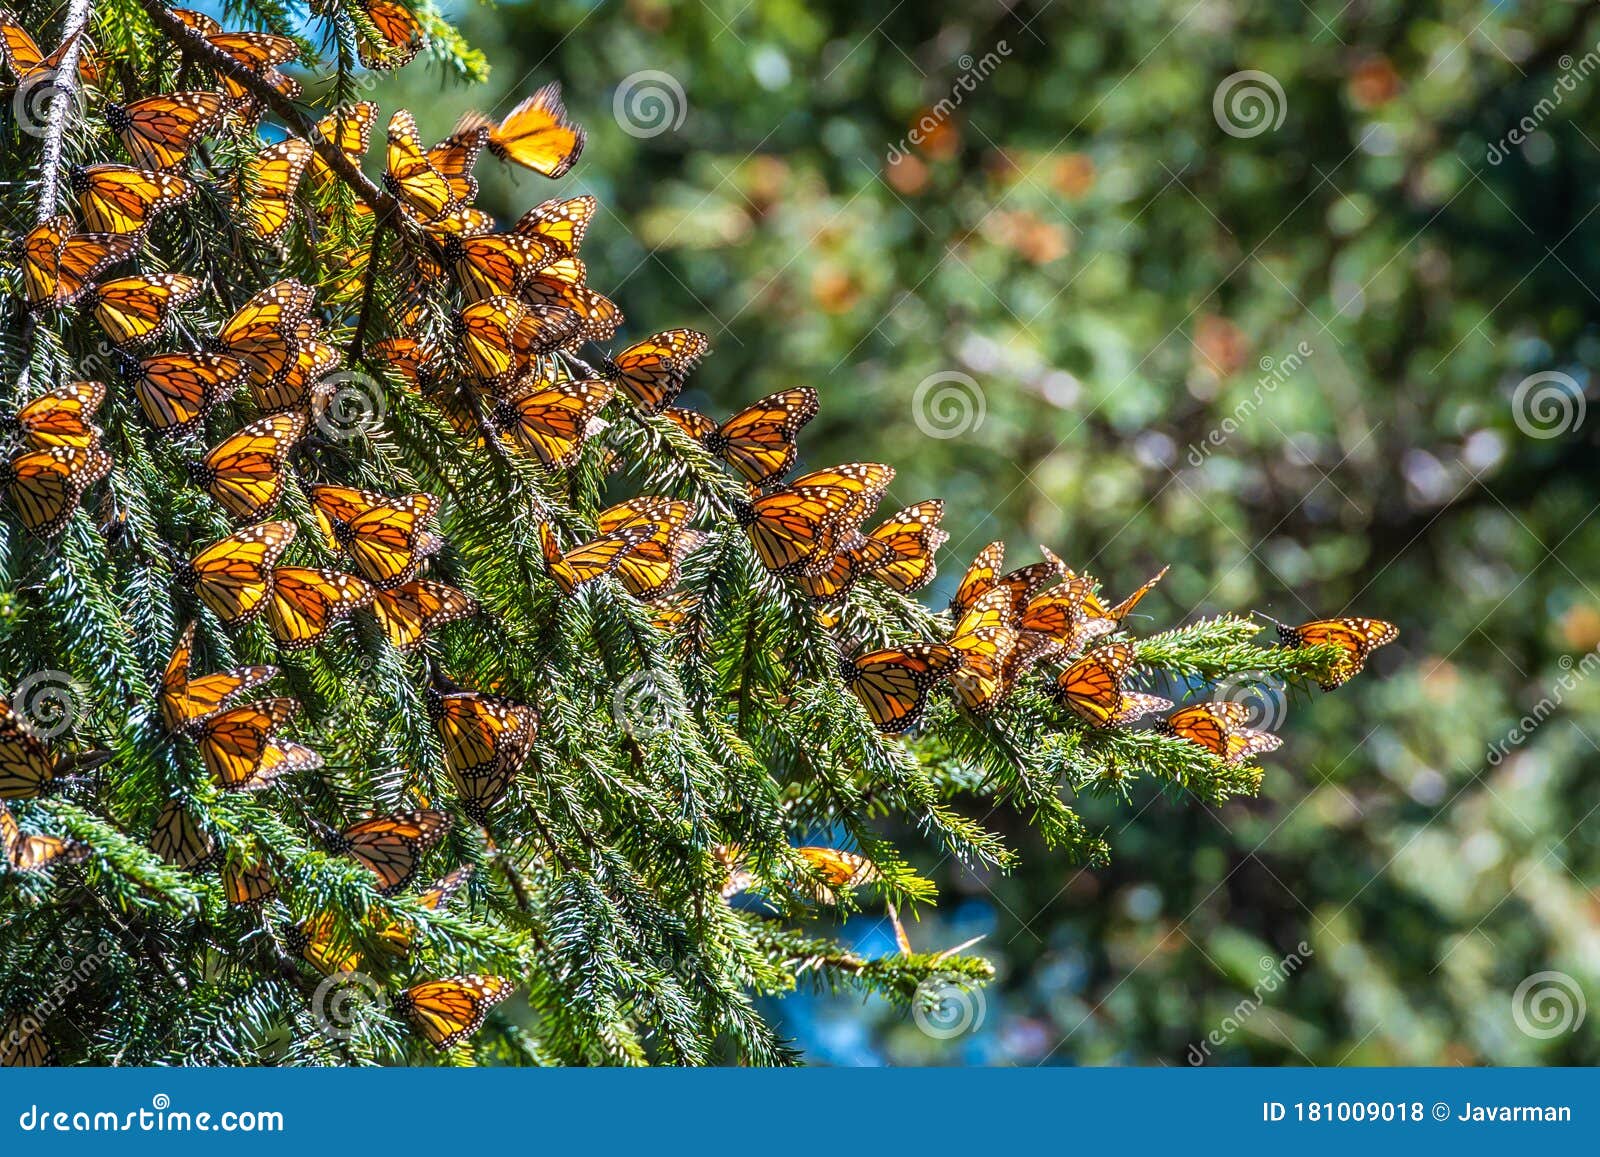 monarch butterfly biosphere reserve in michoacan, mexico